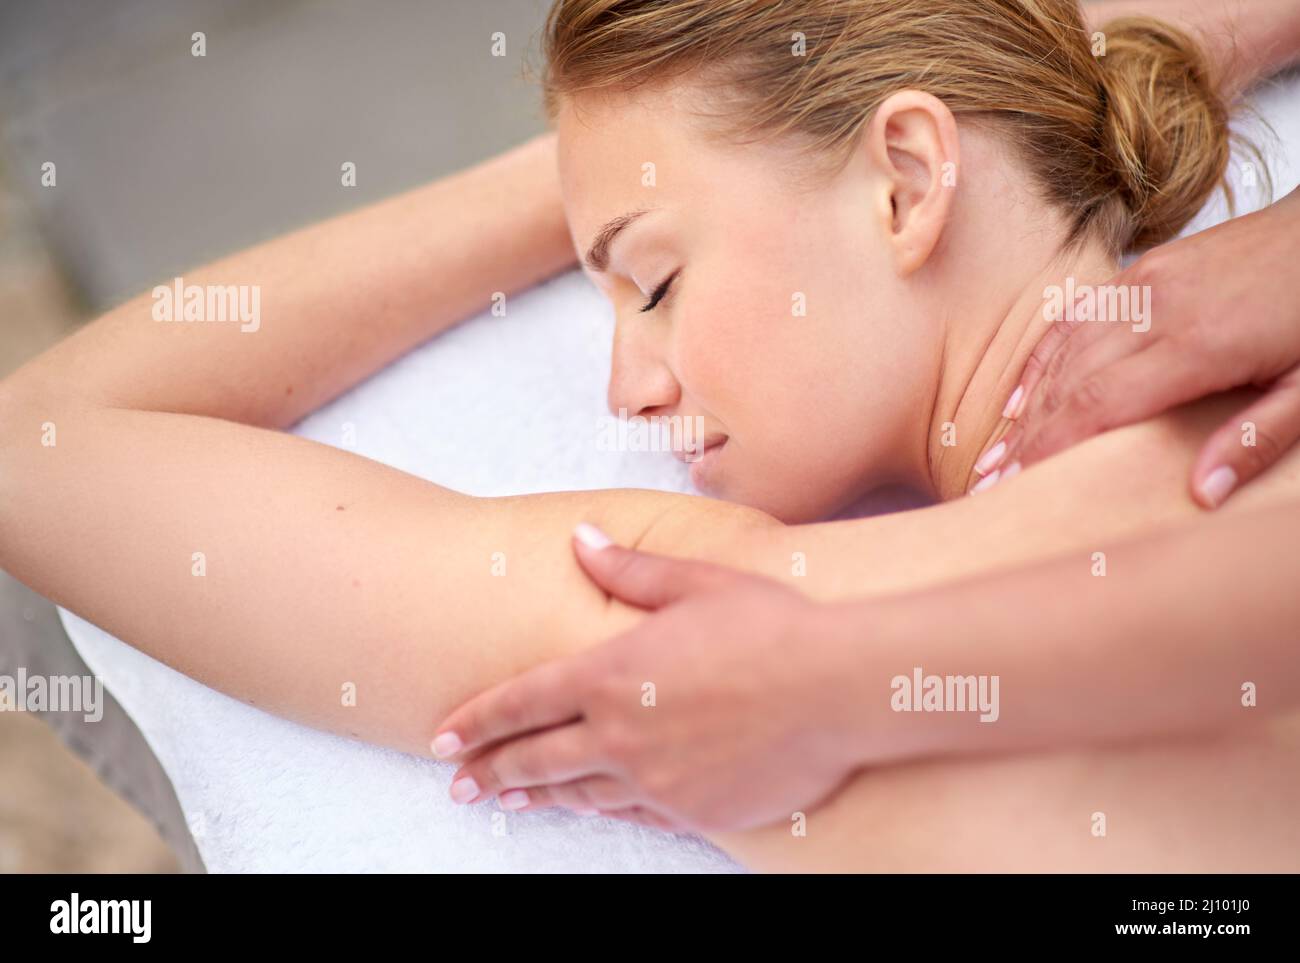 Every woman deserves to be pampered. Cropped shot of a young woman enjyoing a massage at the day spa. Stock Photo